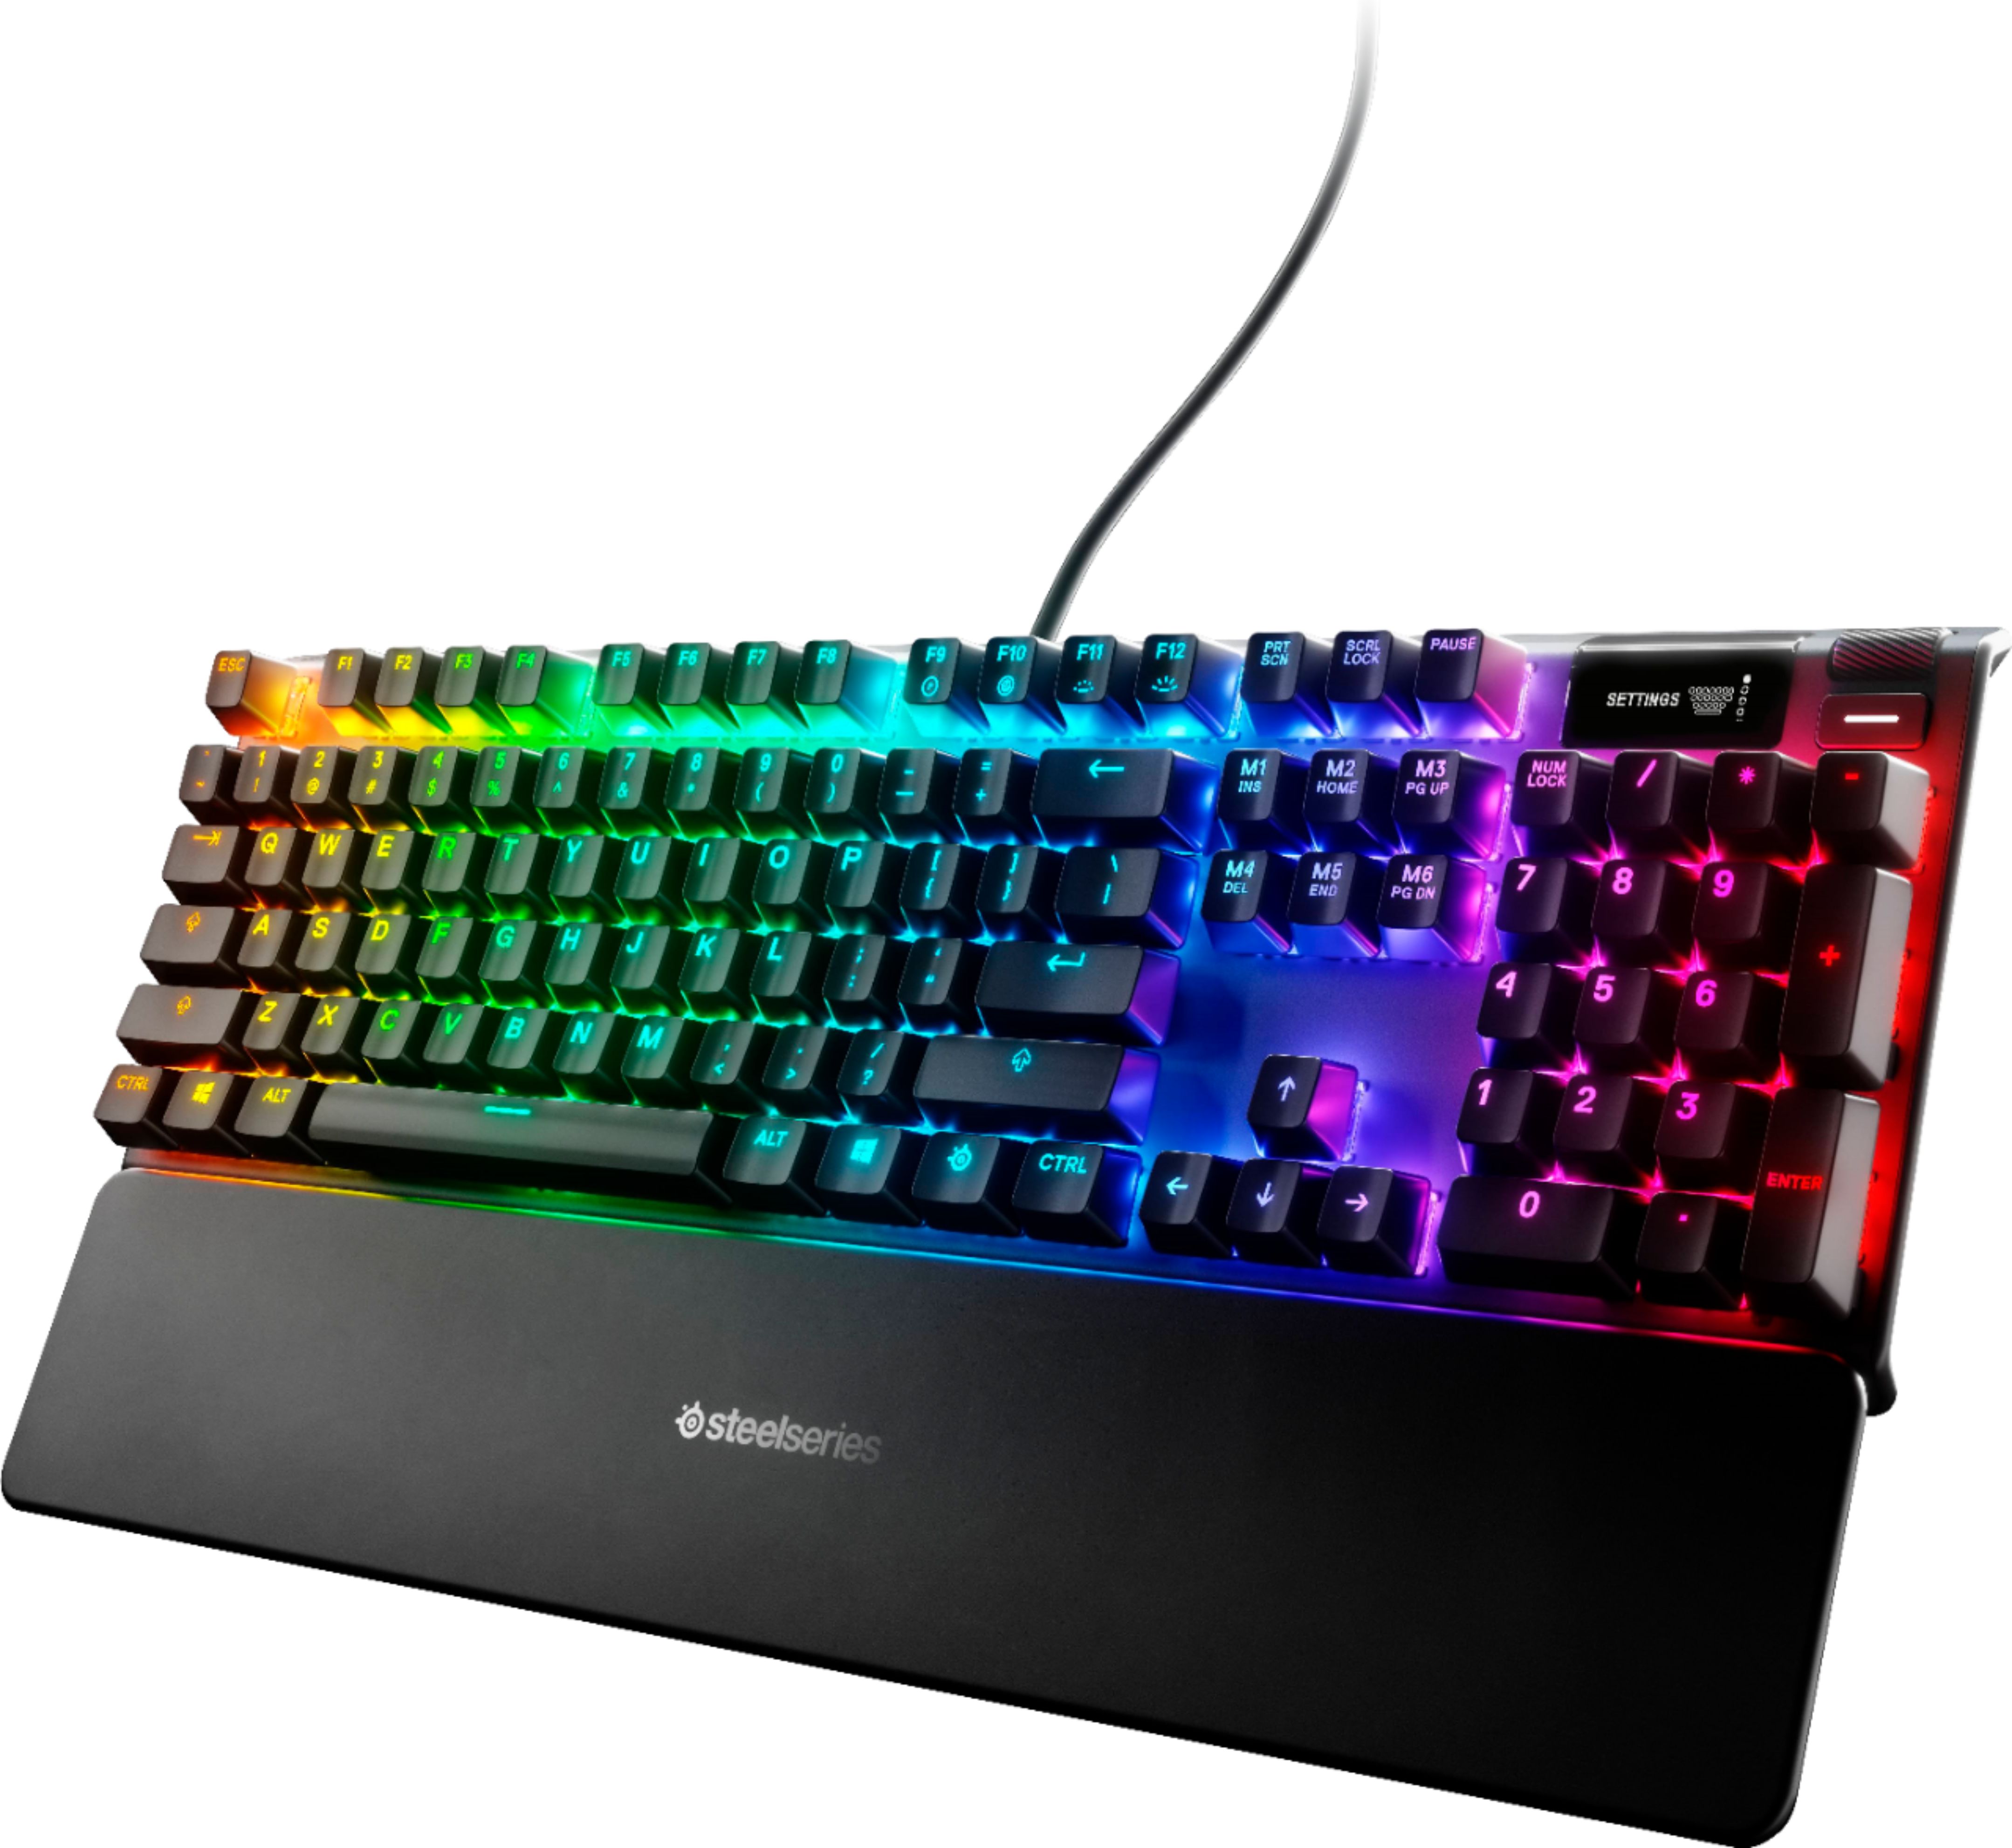 Best Budget Gaming Keyboard by RPM Euro Games - Wired 7 Color LED  Illuminated & Spill Proof Keys 